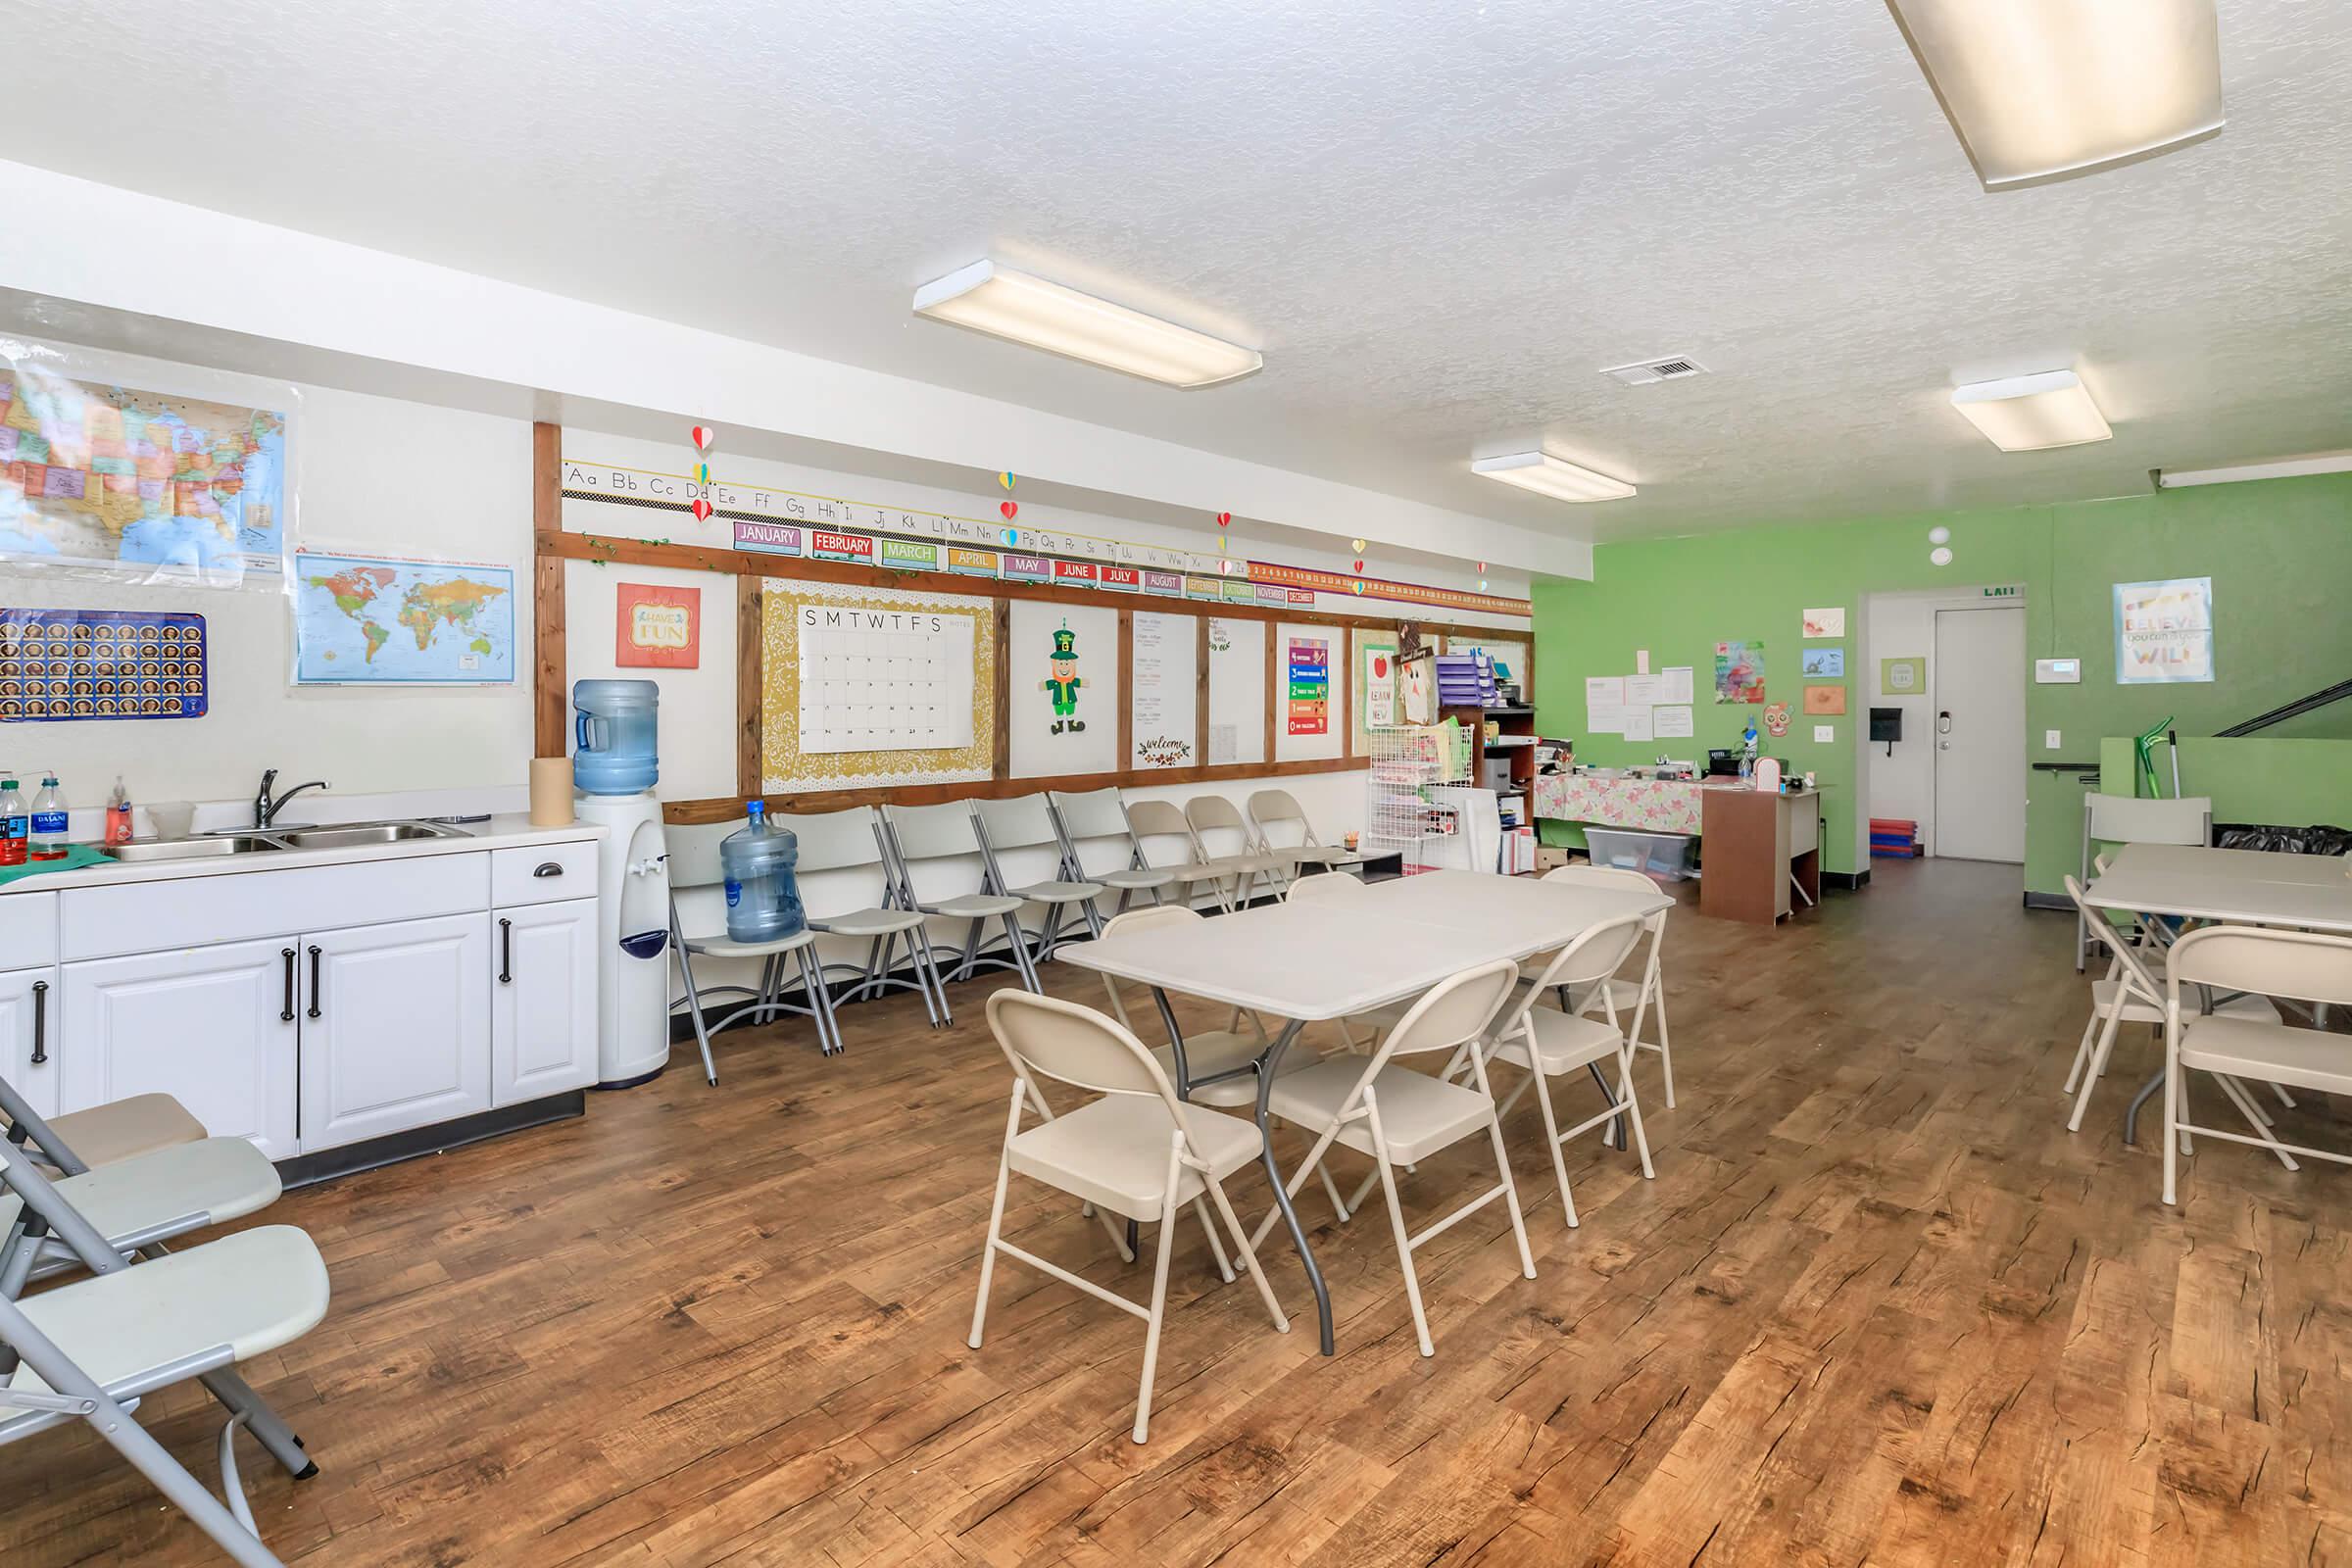 Community room with wooden floors